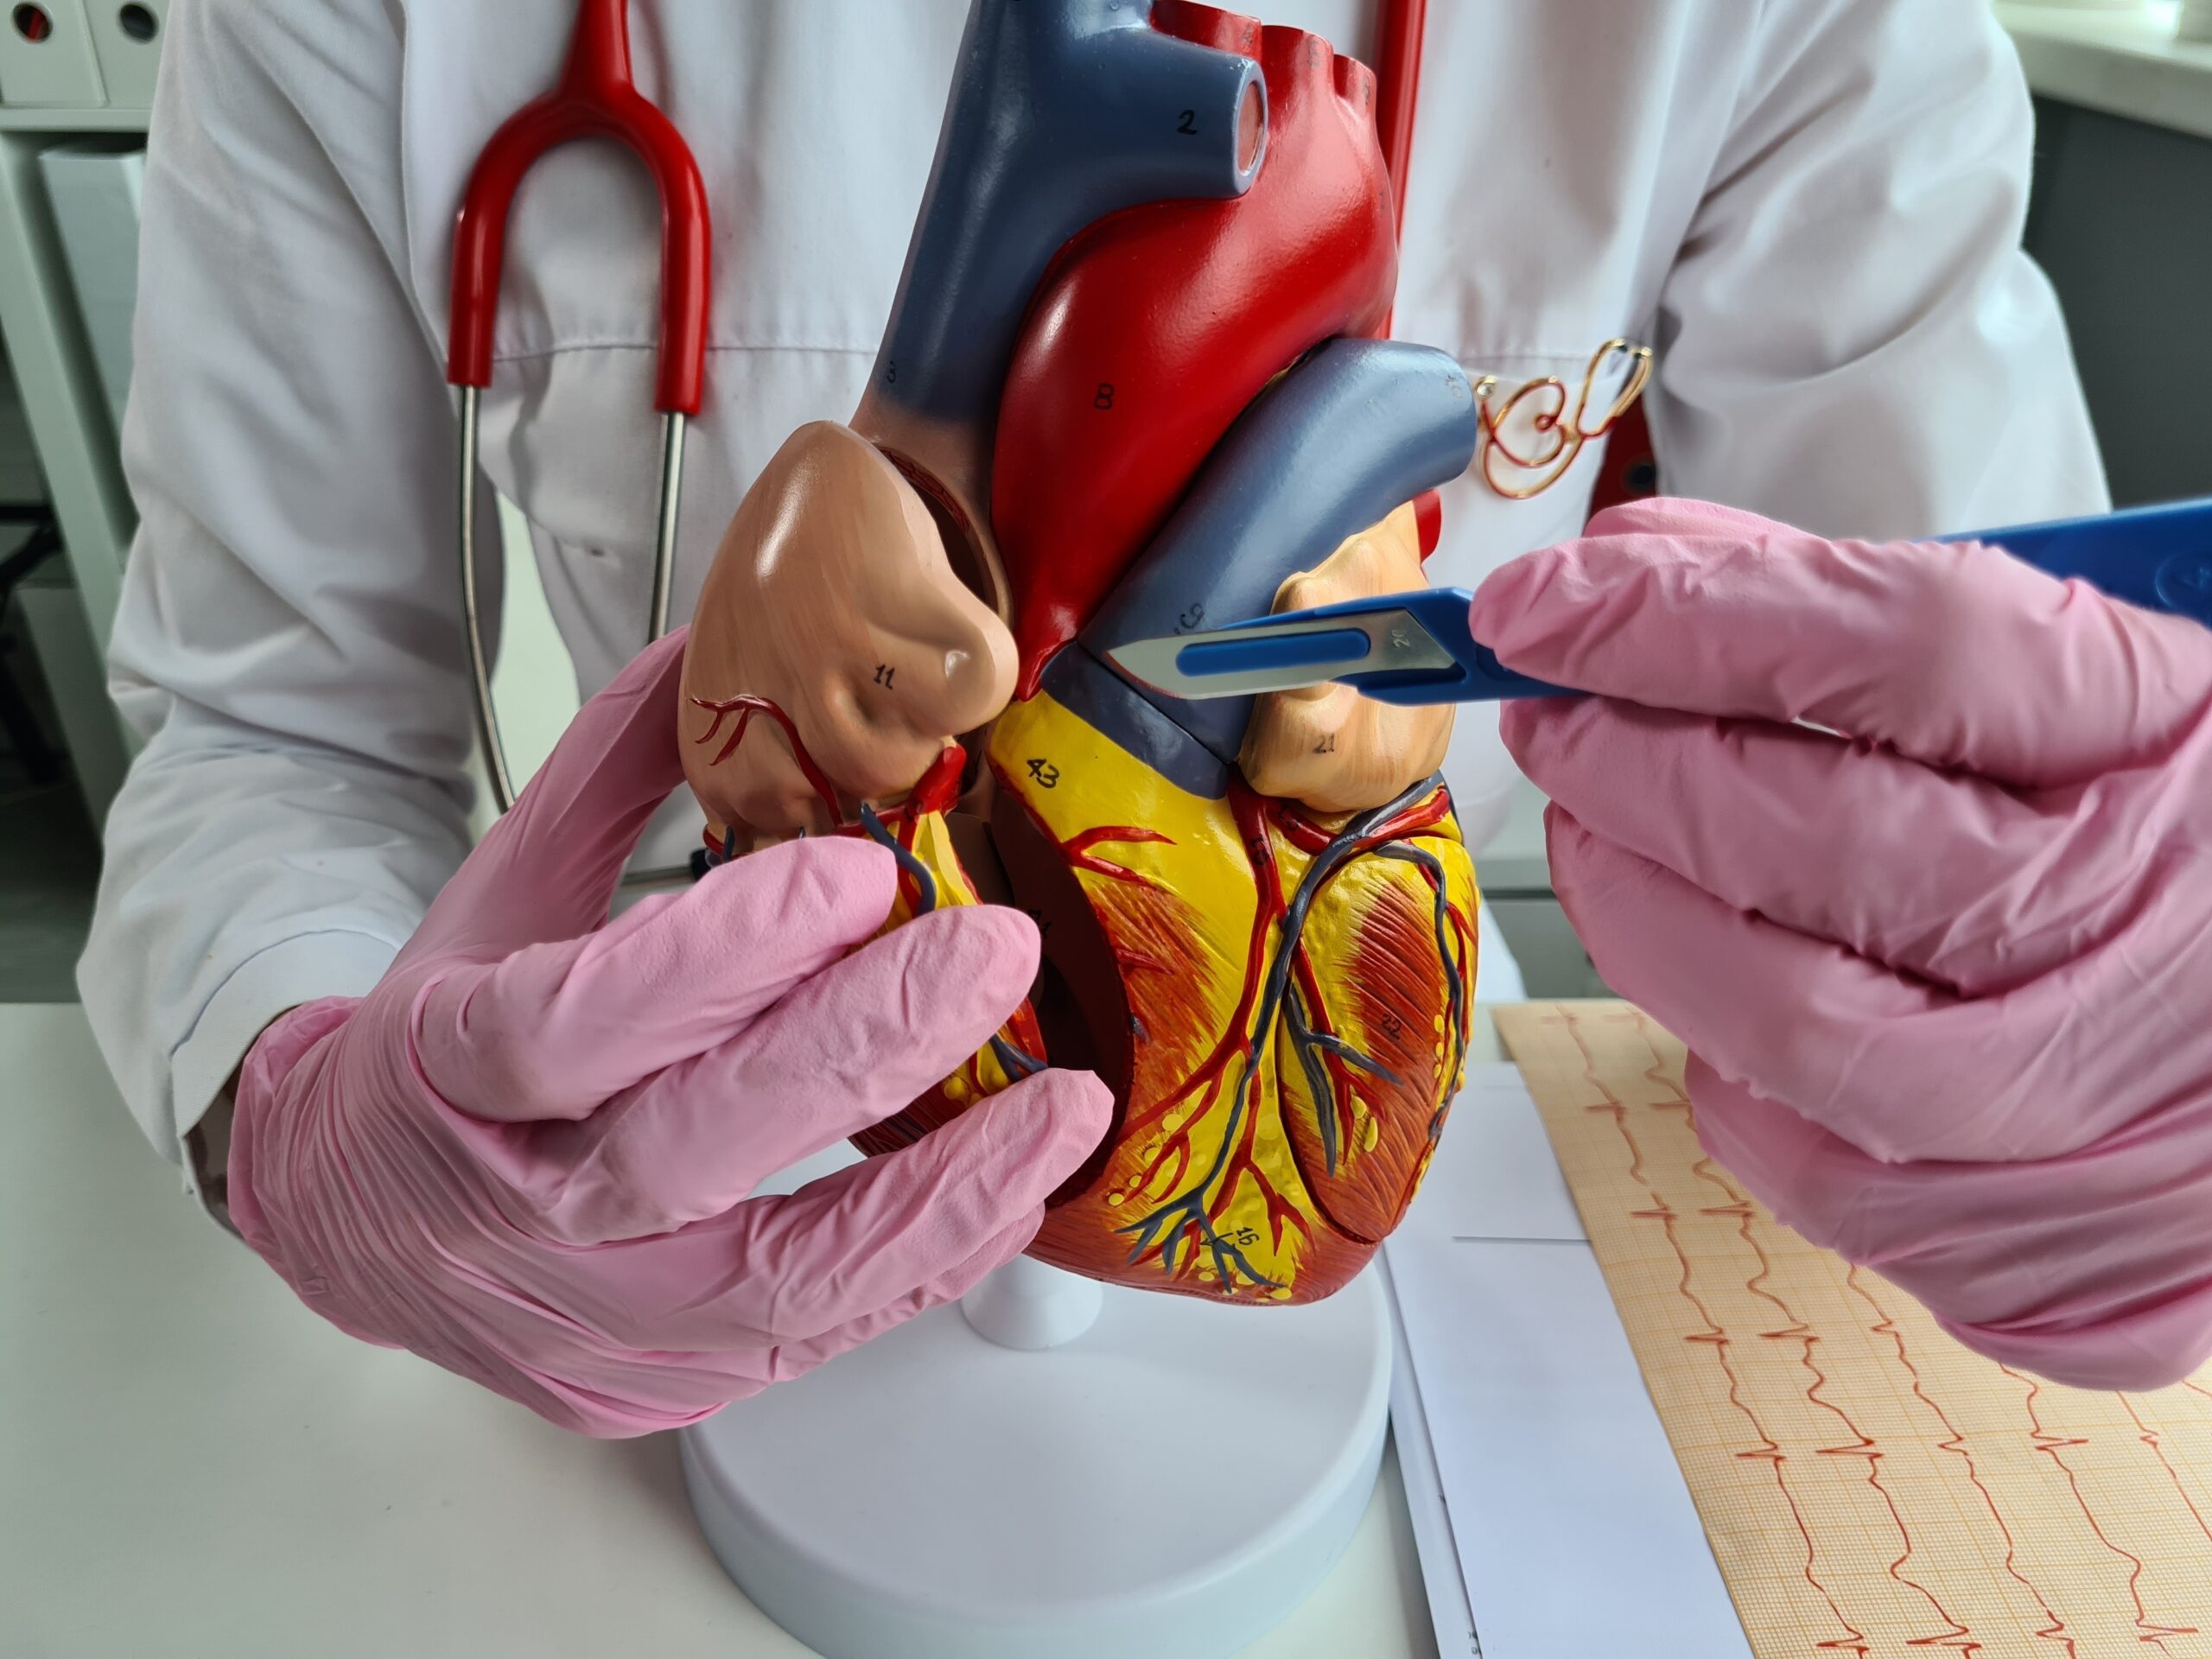 A close-up of a cardiac risk assessment in New Jersey doctor pointing out something on a model of a heart.